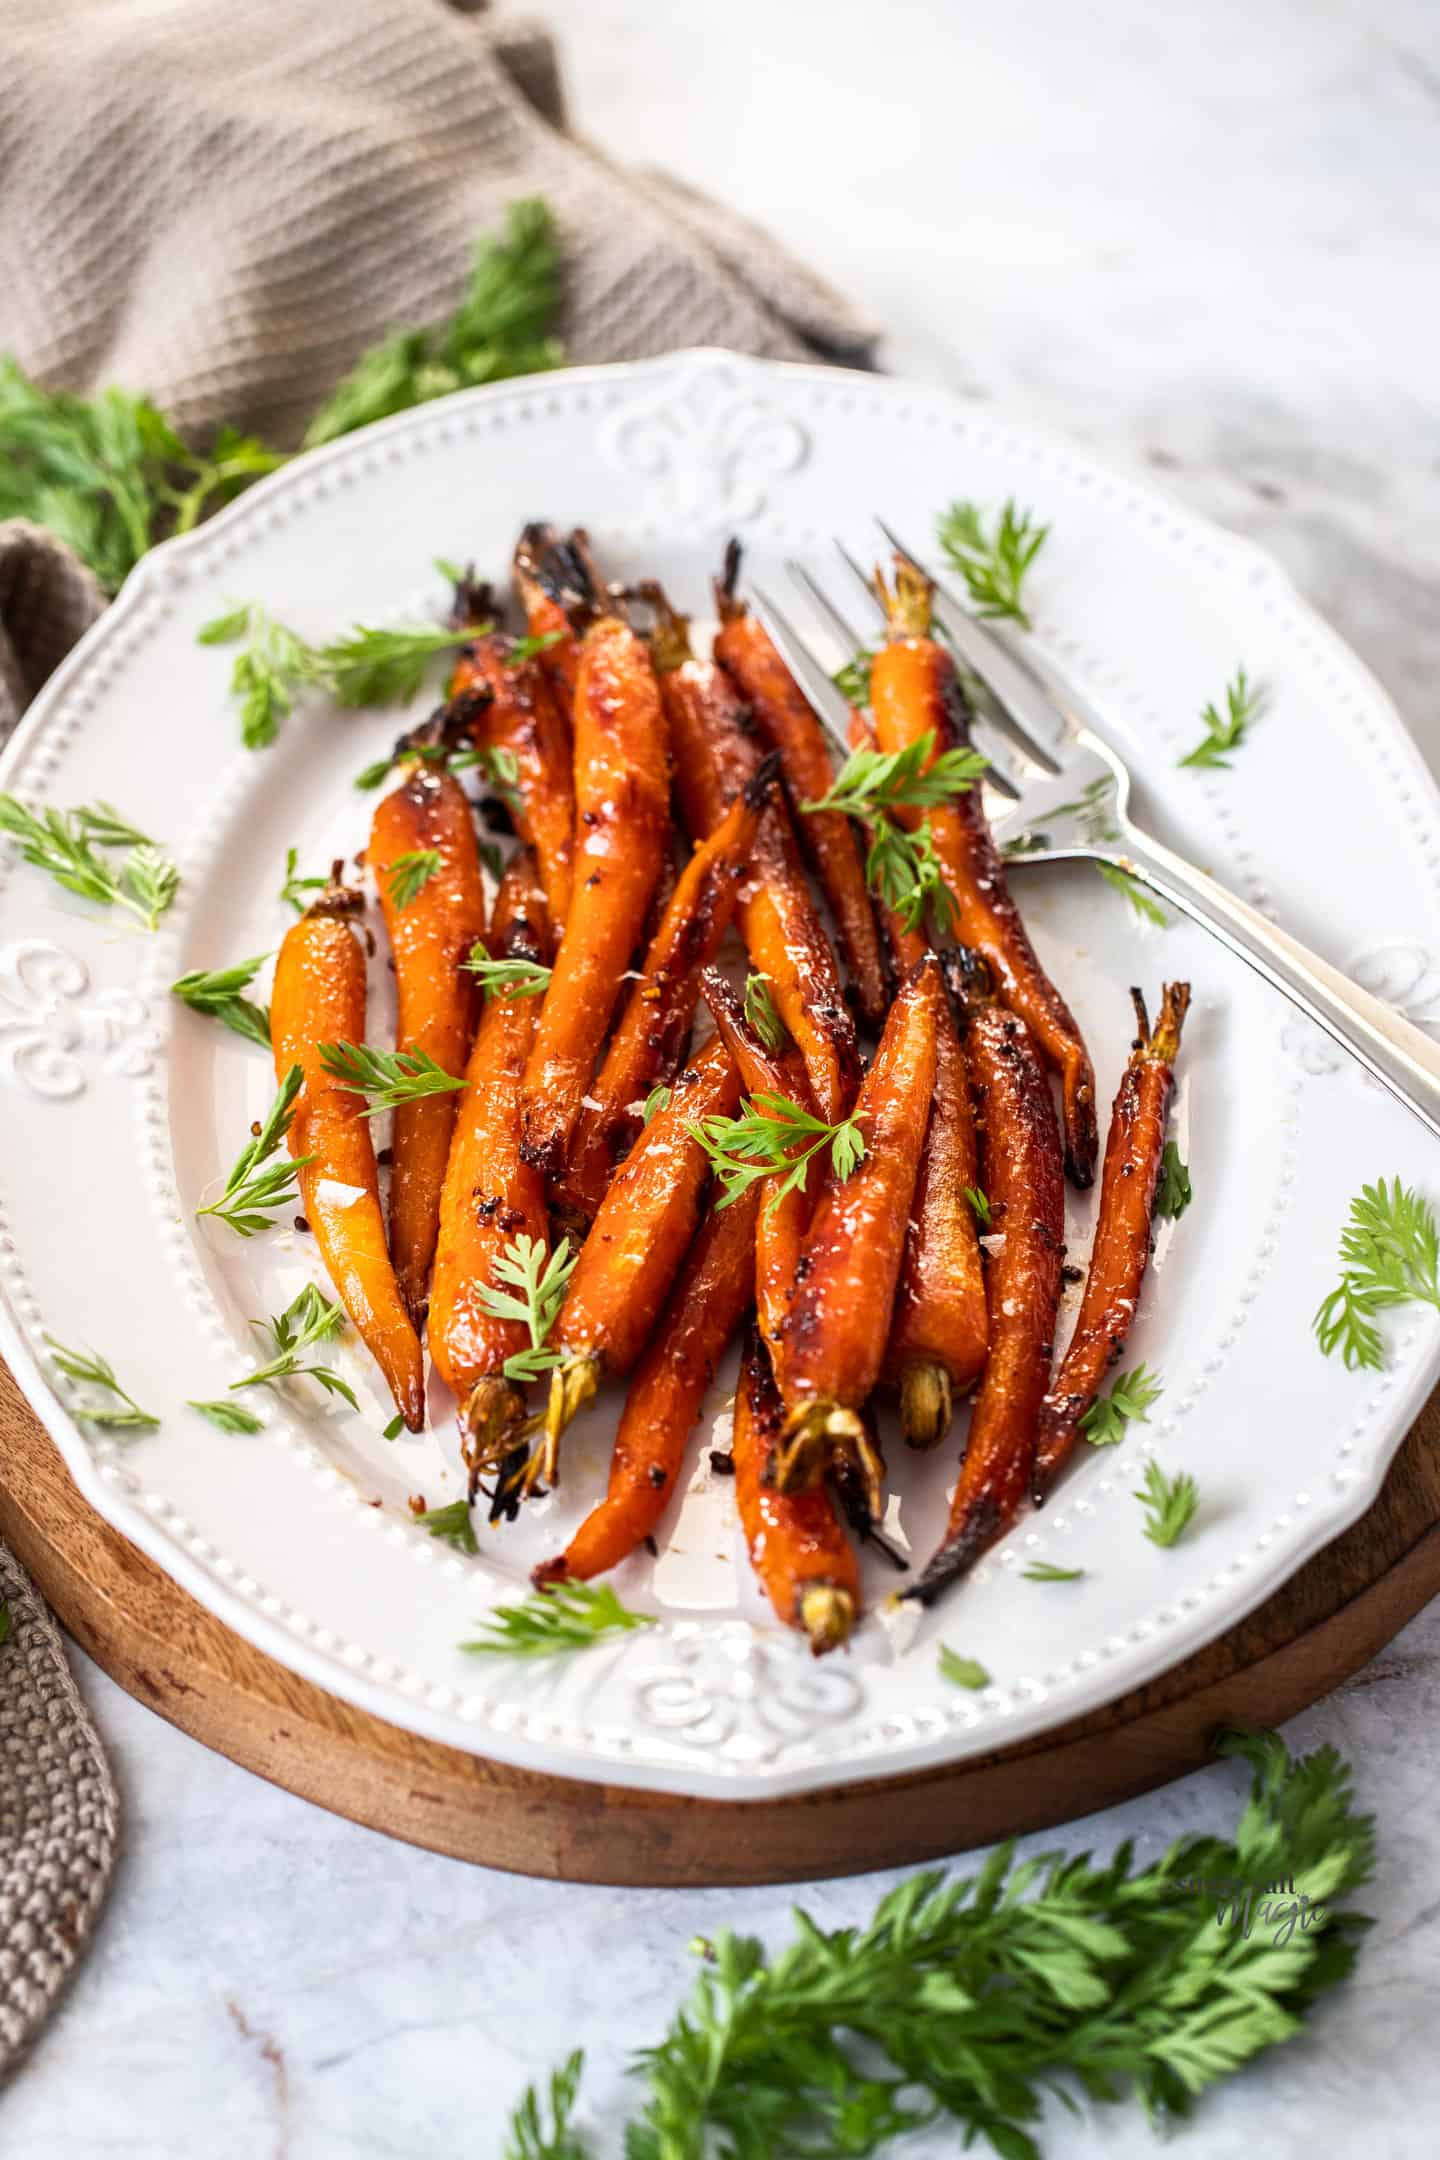 A batch of roasted baby carrots on a white platter.